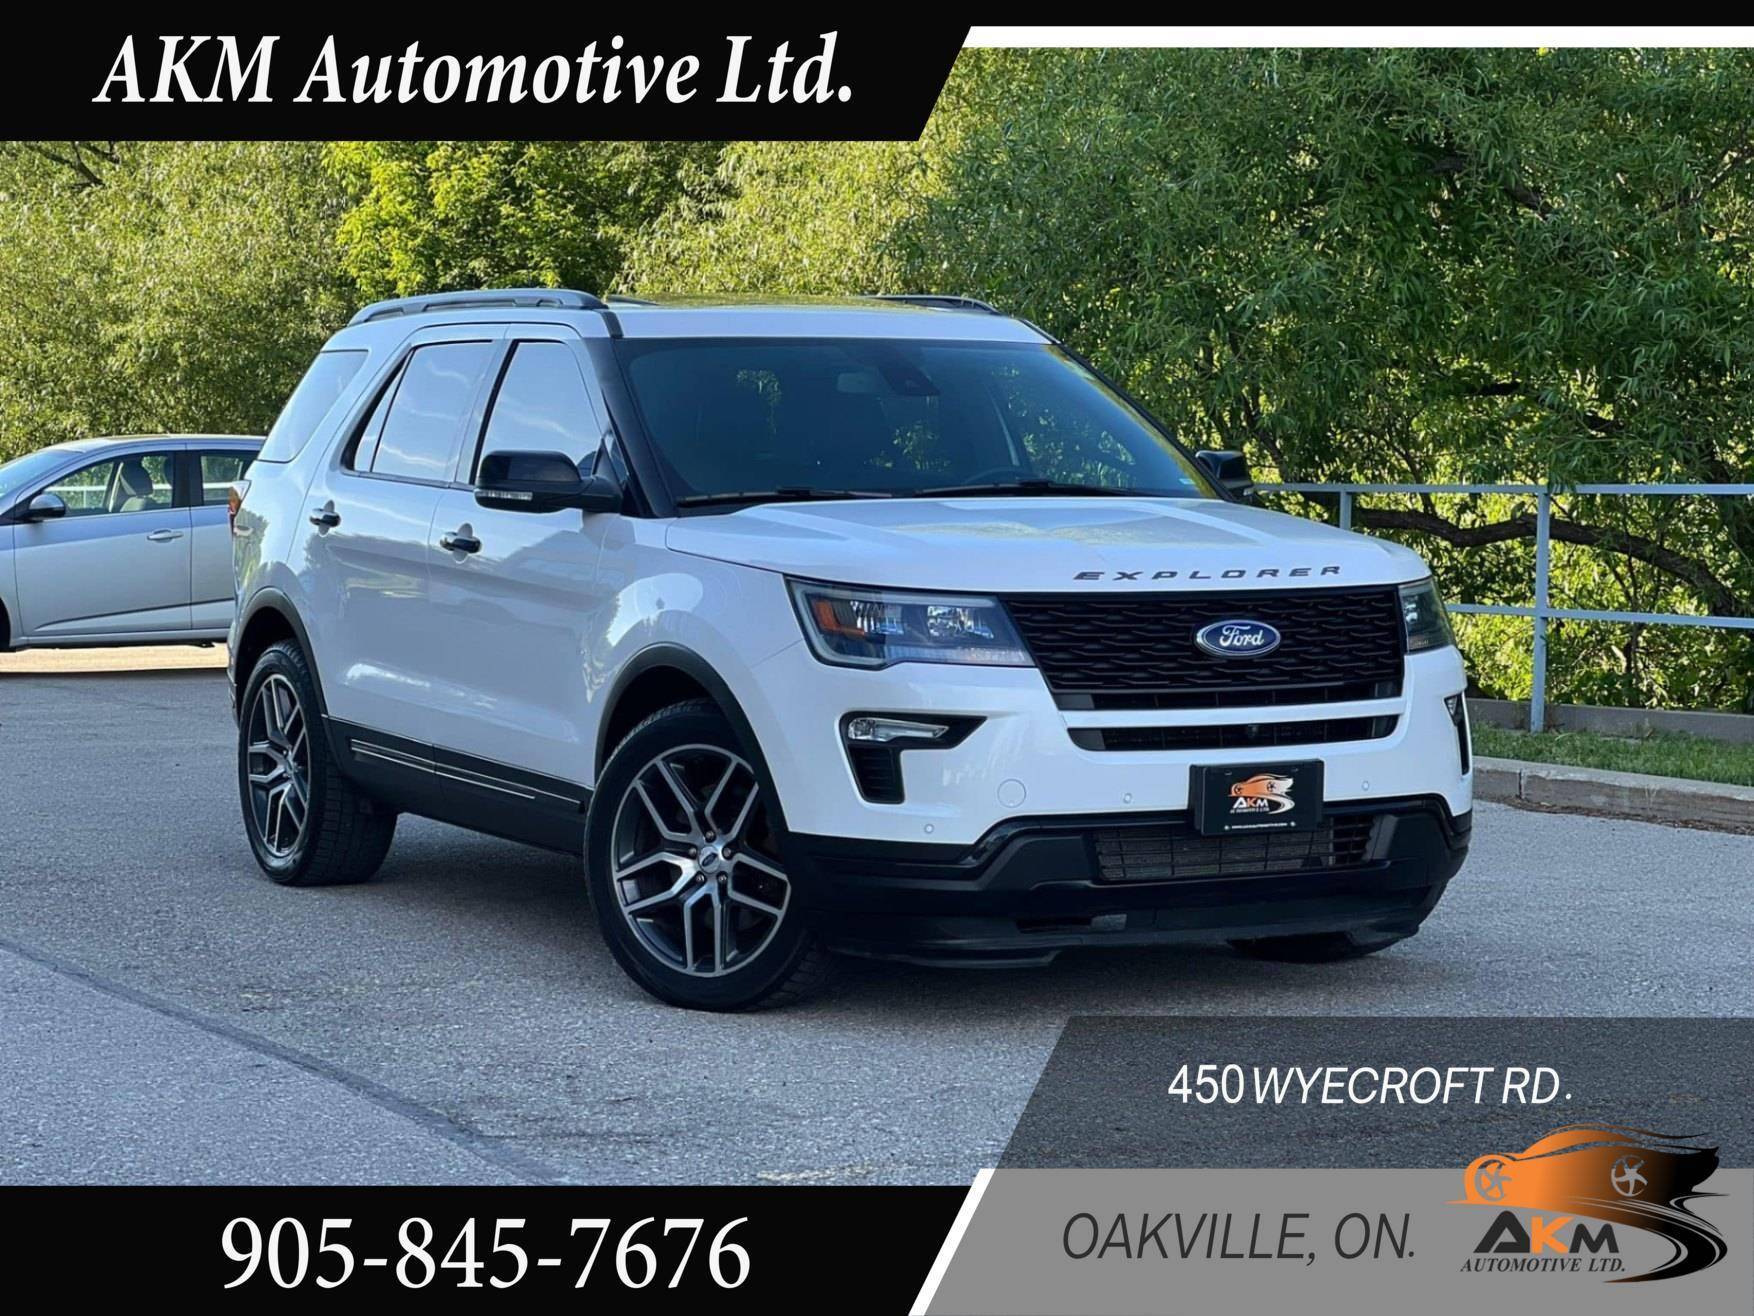 2018 Ford Explorer Sport 4WD, 7 Seats, Certified, Accident Free